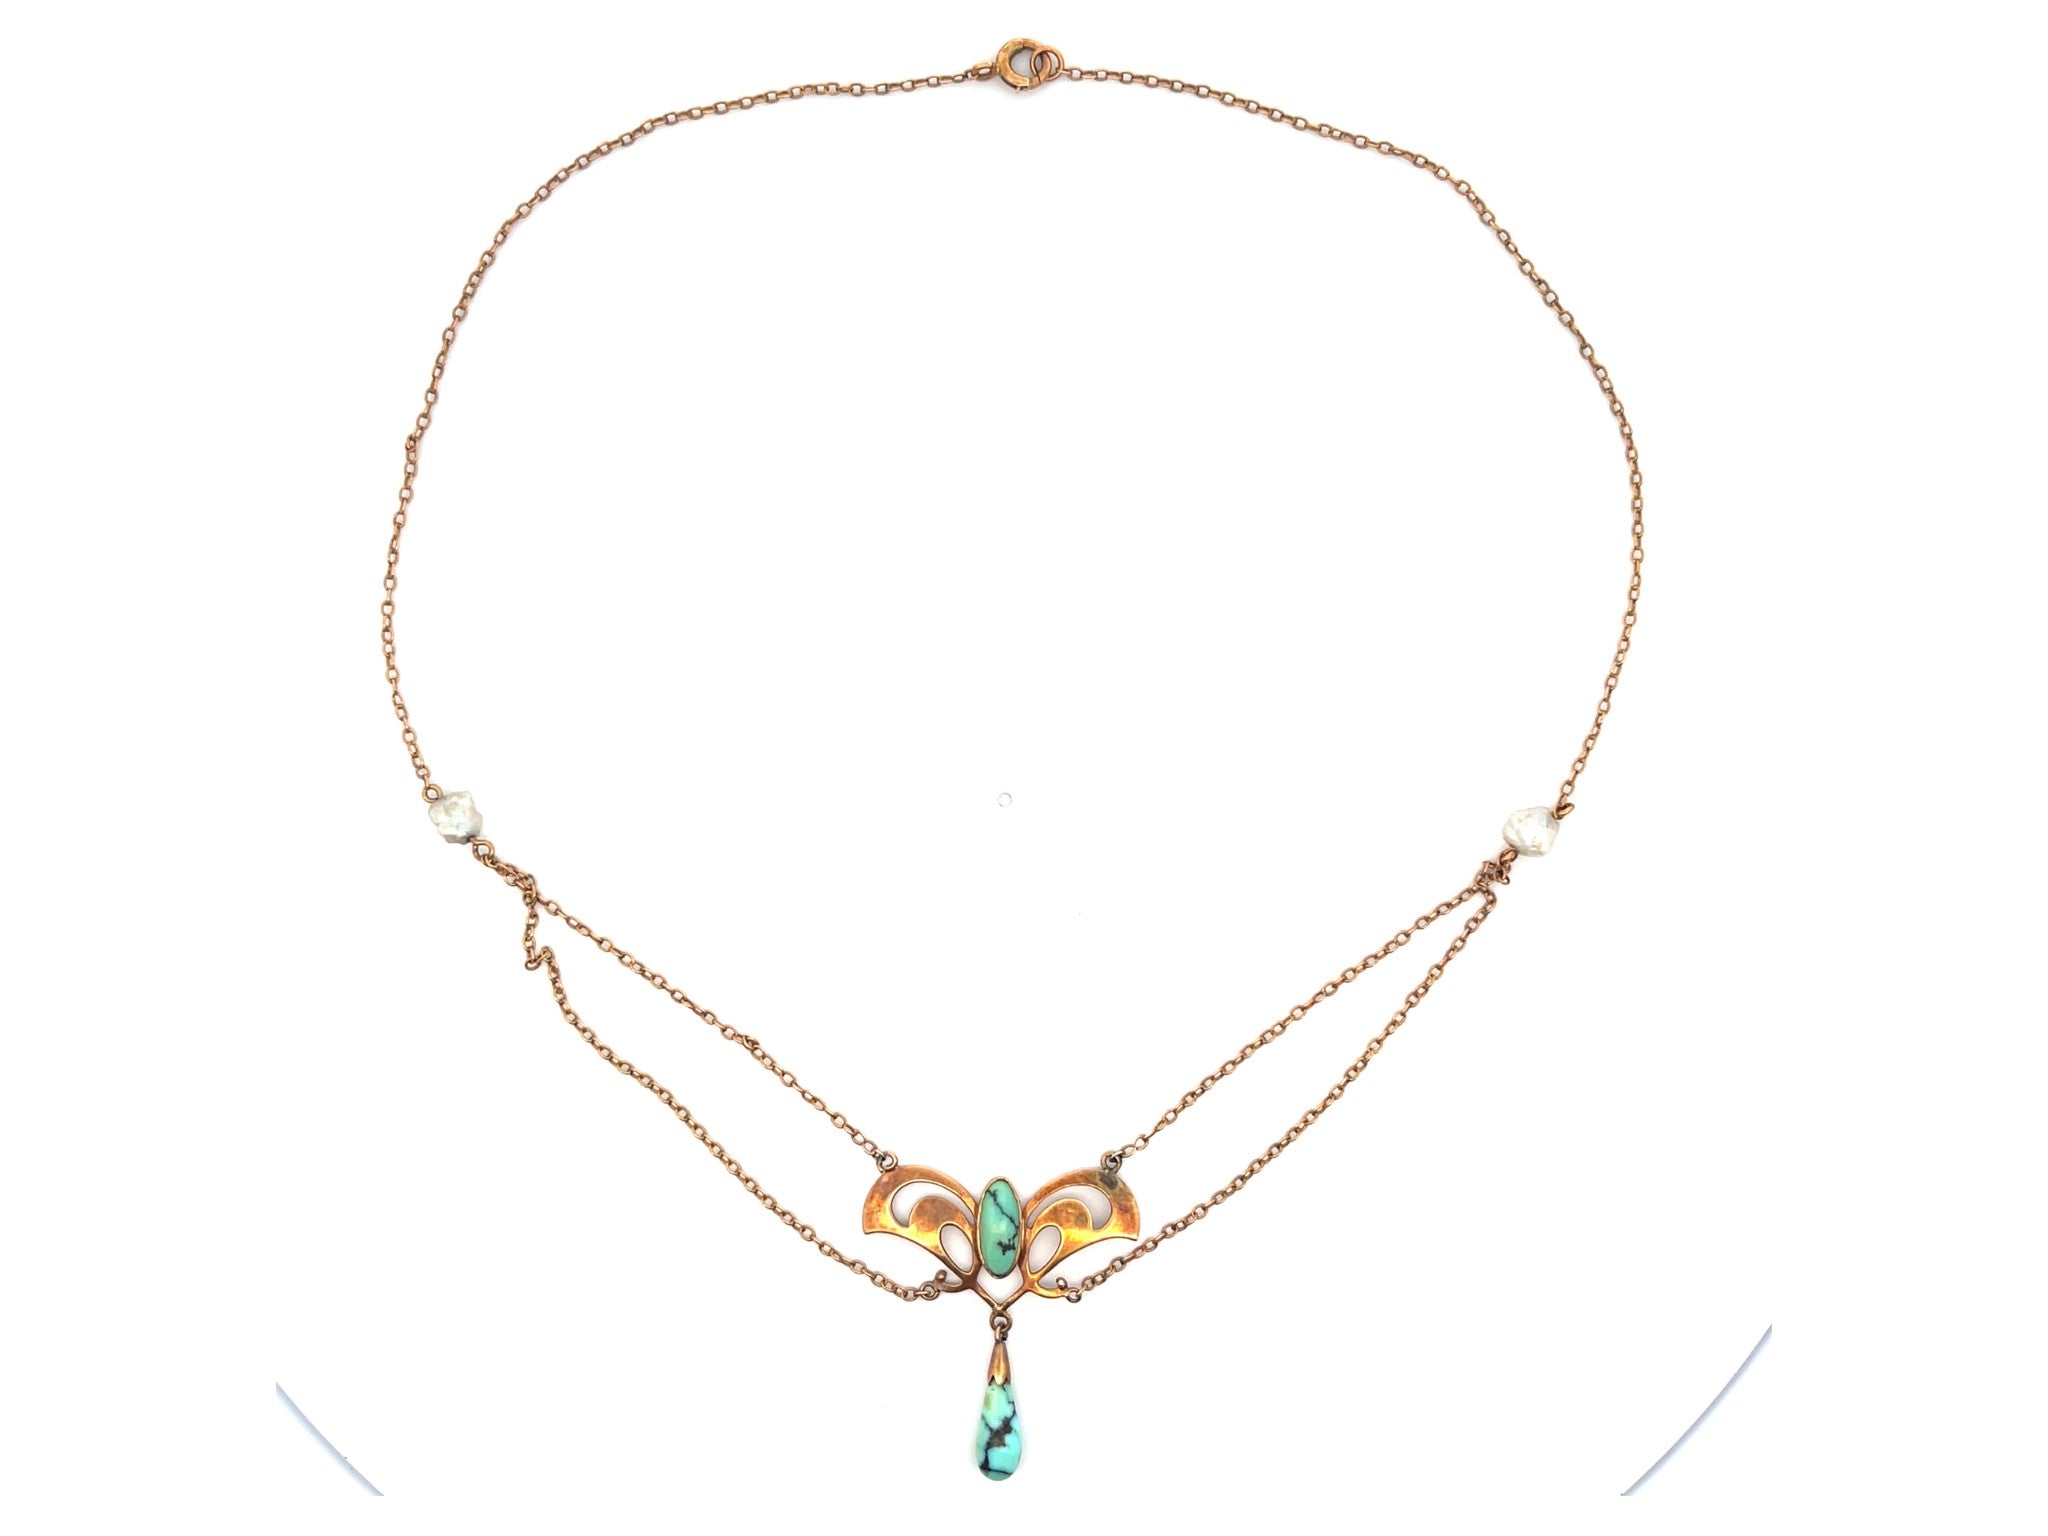 Vintage Art Nouveau Baroque Pearl and Turquoise Necklace 10K Rose Gold